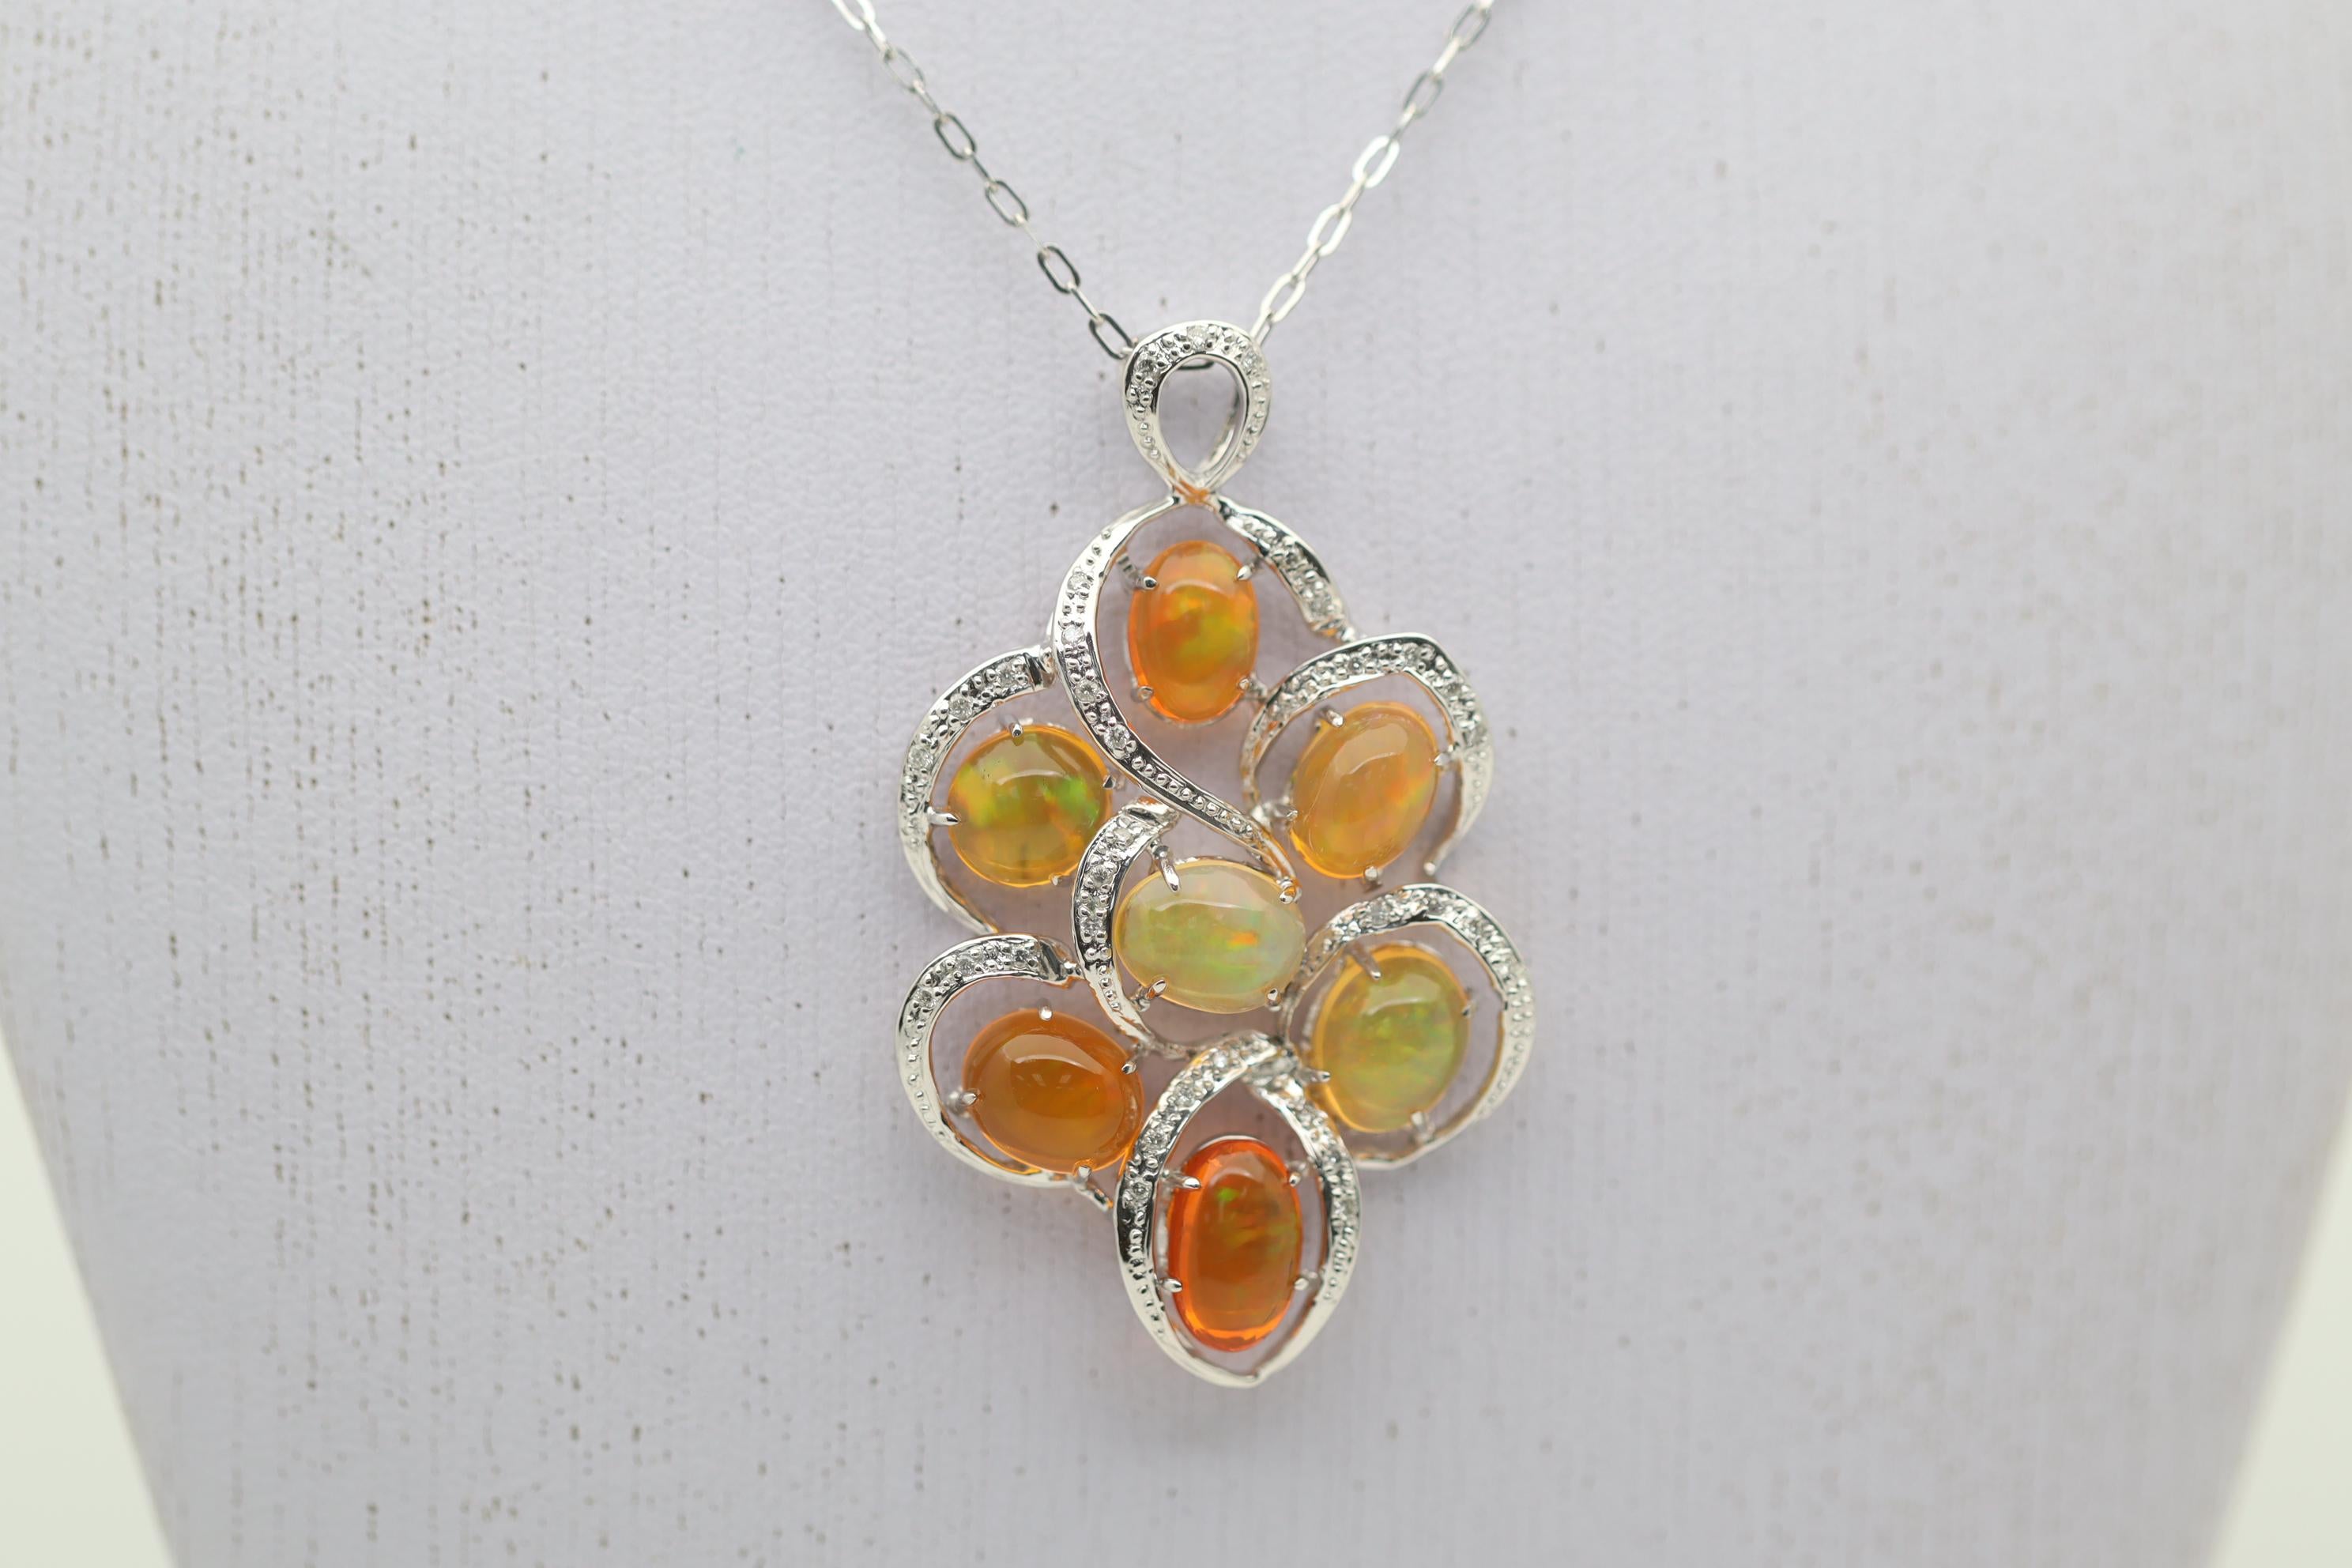 An elegant pendant featuring 7 lovely fire opals from Mexico. They weigh a total of 9.57 carats and have great play-of-color as each stone has flashes of greens and orangy-reds. Complementing the opals are 0.20 carats of round brilliant-cut diamonds